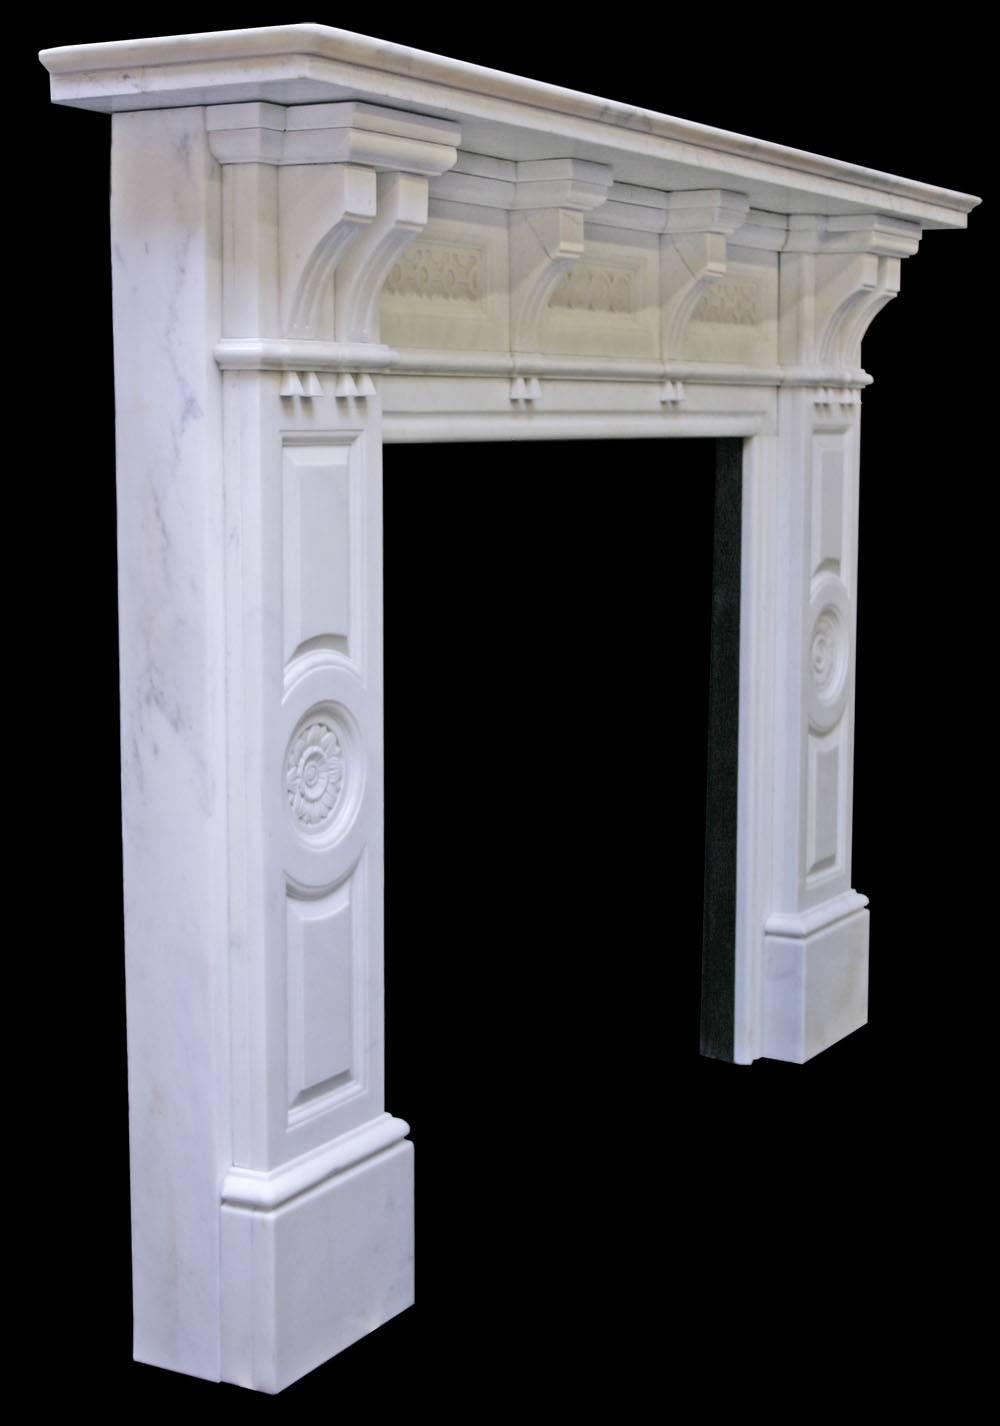 Antique late Victorian statuary white marble chimneypiece with fielded panels to the legs centred by carved flowers, the frieze is decorated with flowers and guilloche carving. From a large villa in Bournmouth, United Kingdom. 

Shelf length: 74